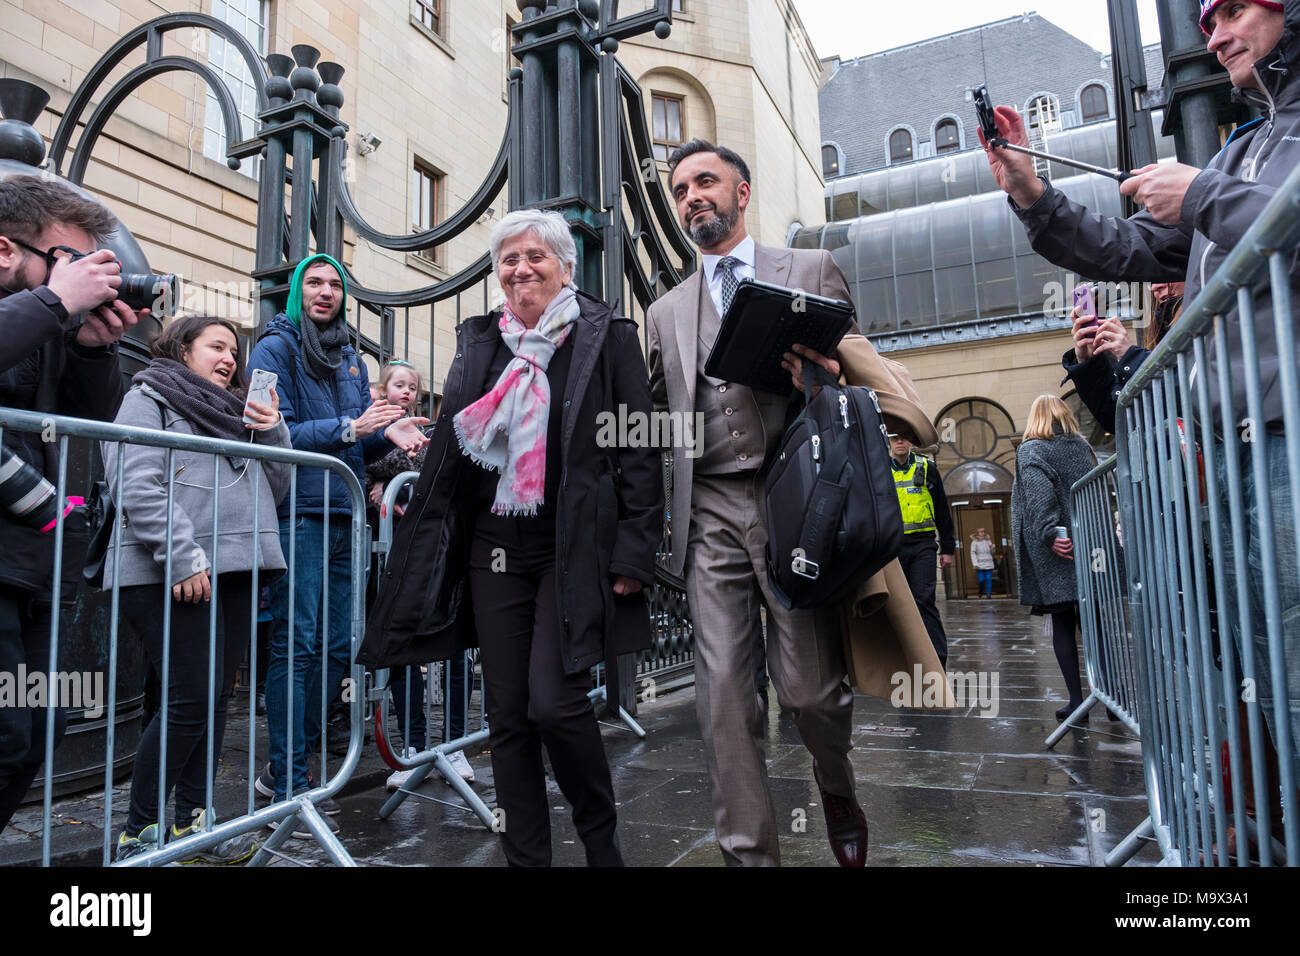 Edinburgh, Scotland,UK. 28 March 2018.  Clara Ponsati  leaving  Edinburgh Sheriff Court after her hearing. Ponsati faces extradition to Spain to face charges of rebellion over her support of Catalan Independence. Credit: Iain Masterton/Alamy Live News Stock Photo